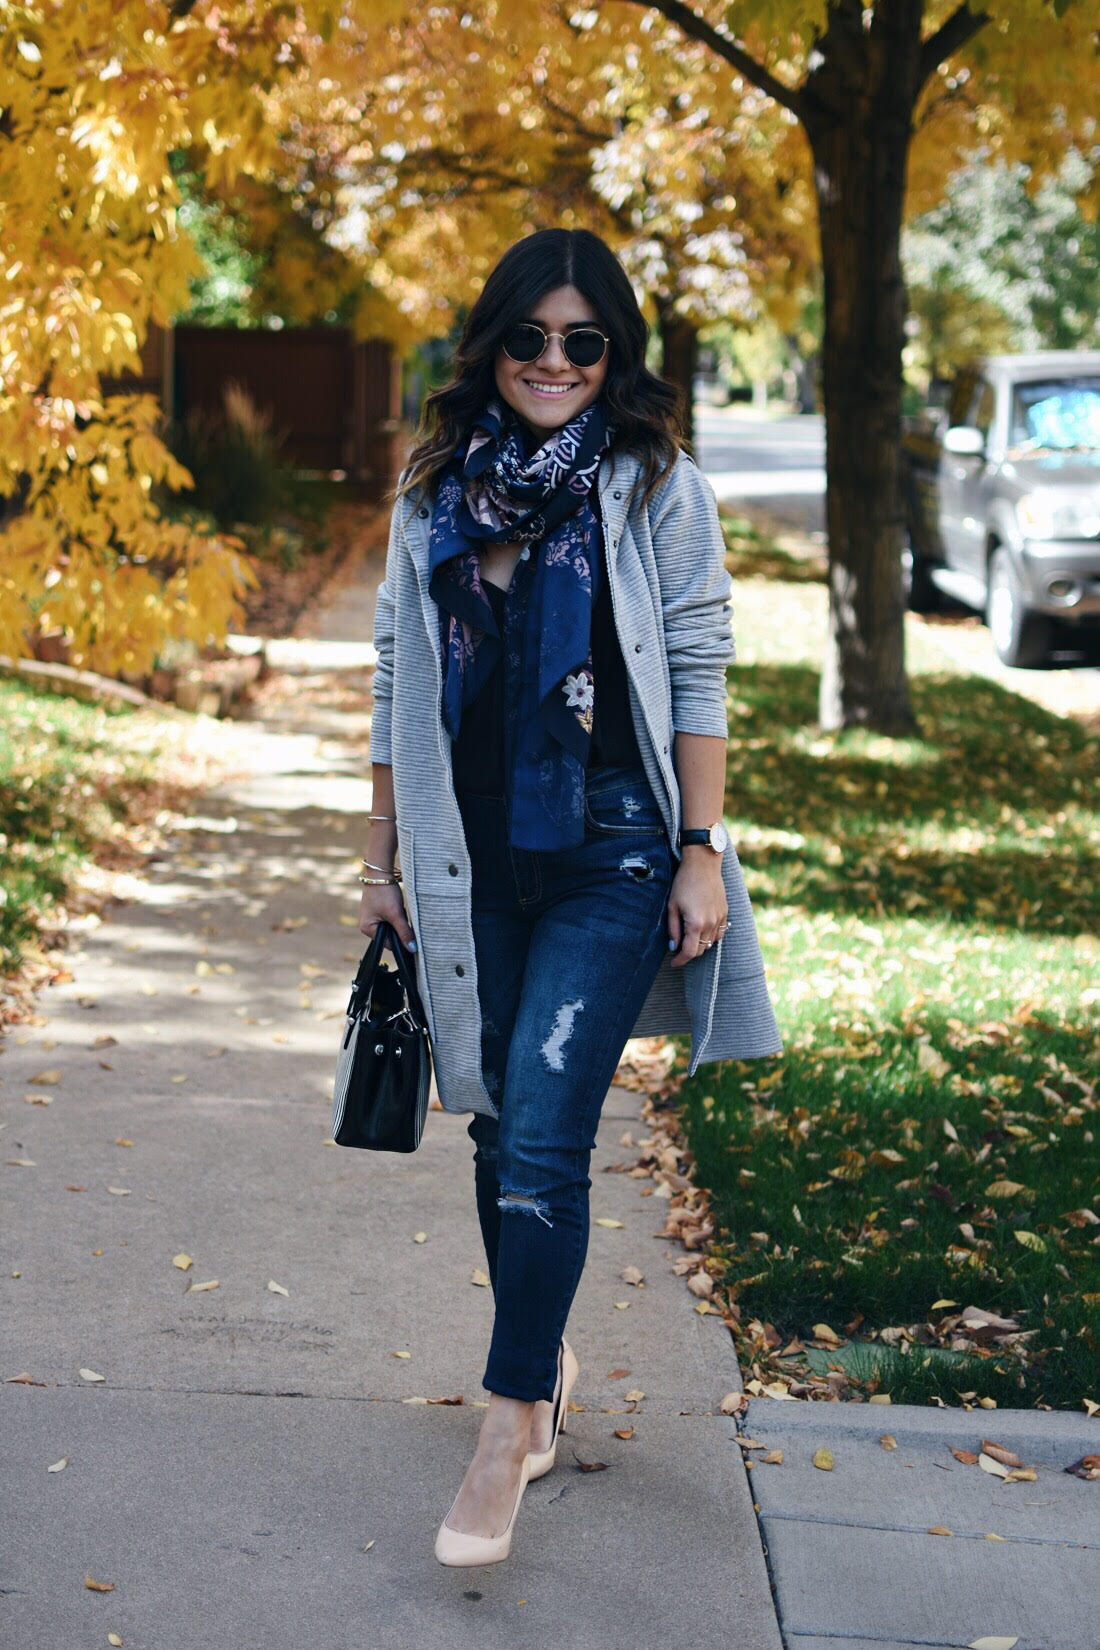 Carolina Hellal of Chic Talk wearing a Evy's tree grey jacket, Old Navy jeans, Sam Edelman nude pumps, Rayban rounded sunglasses and H&M printed scarf